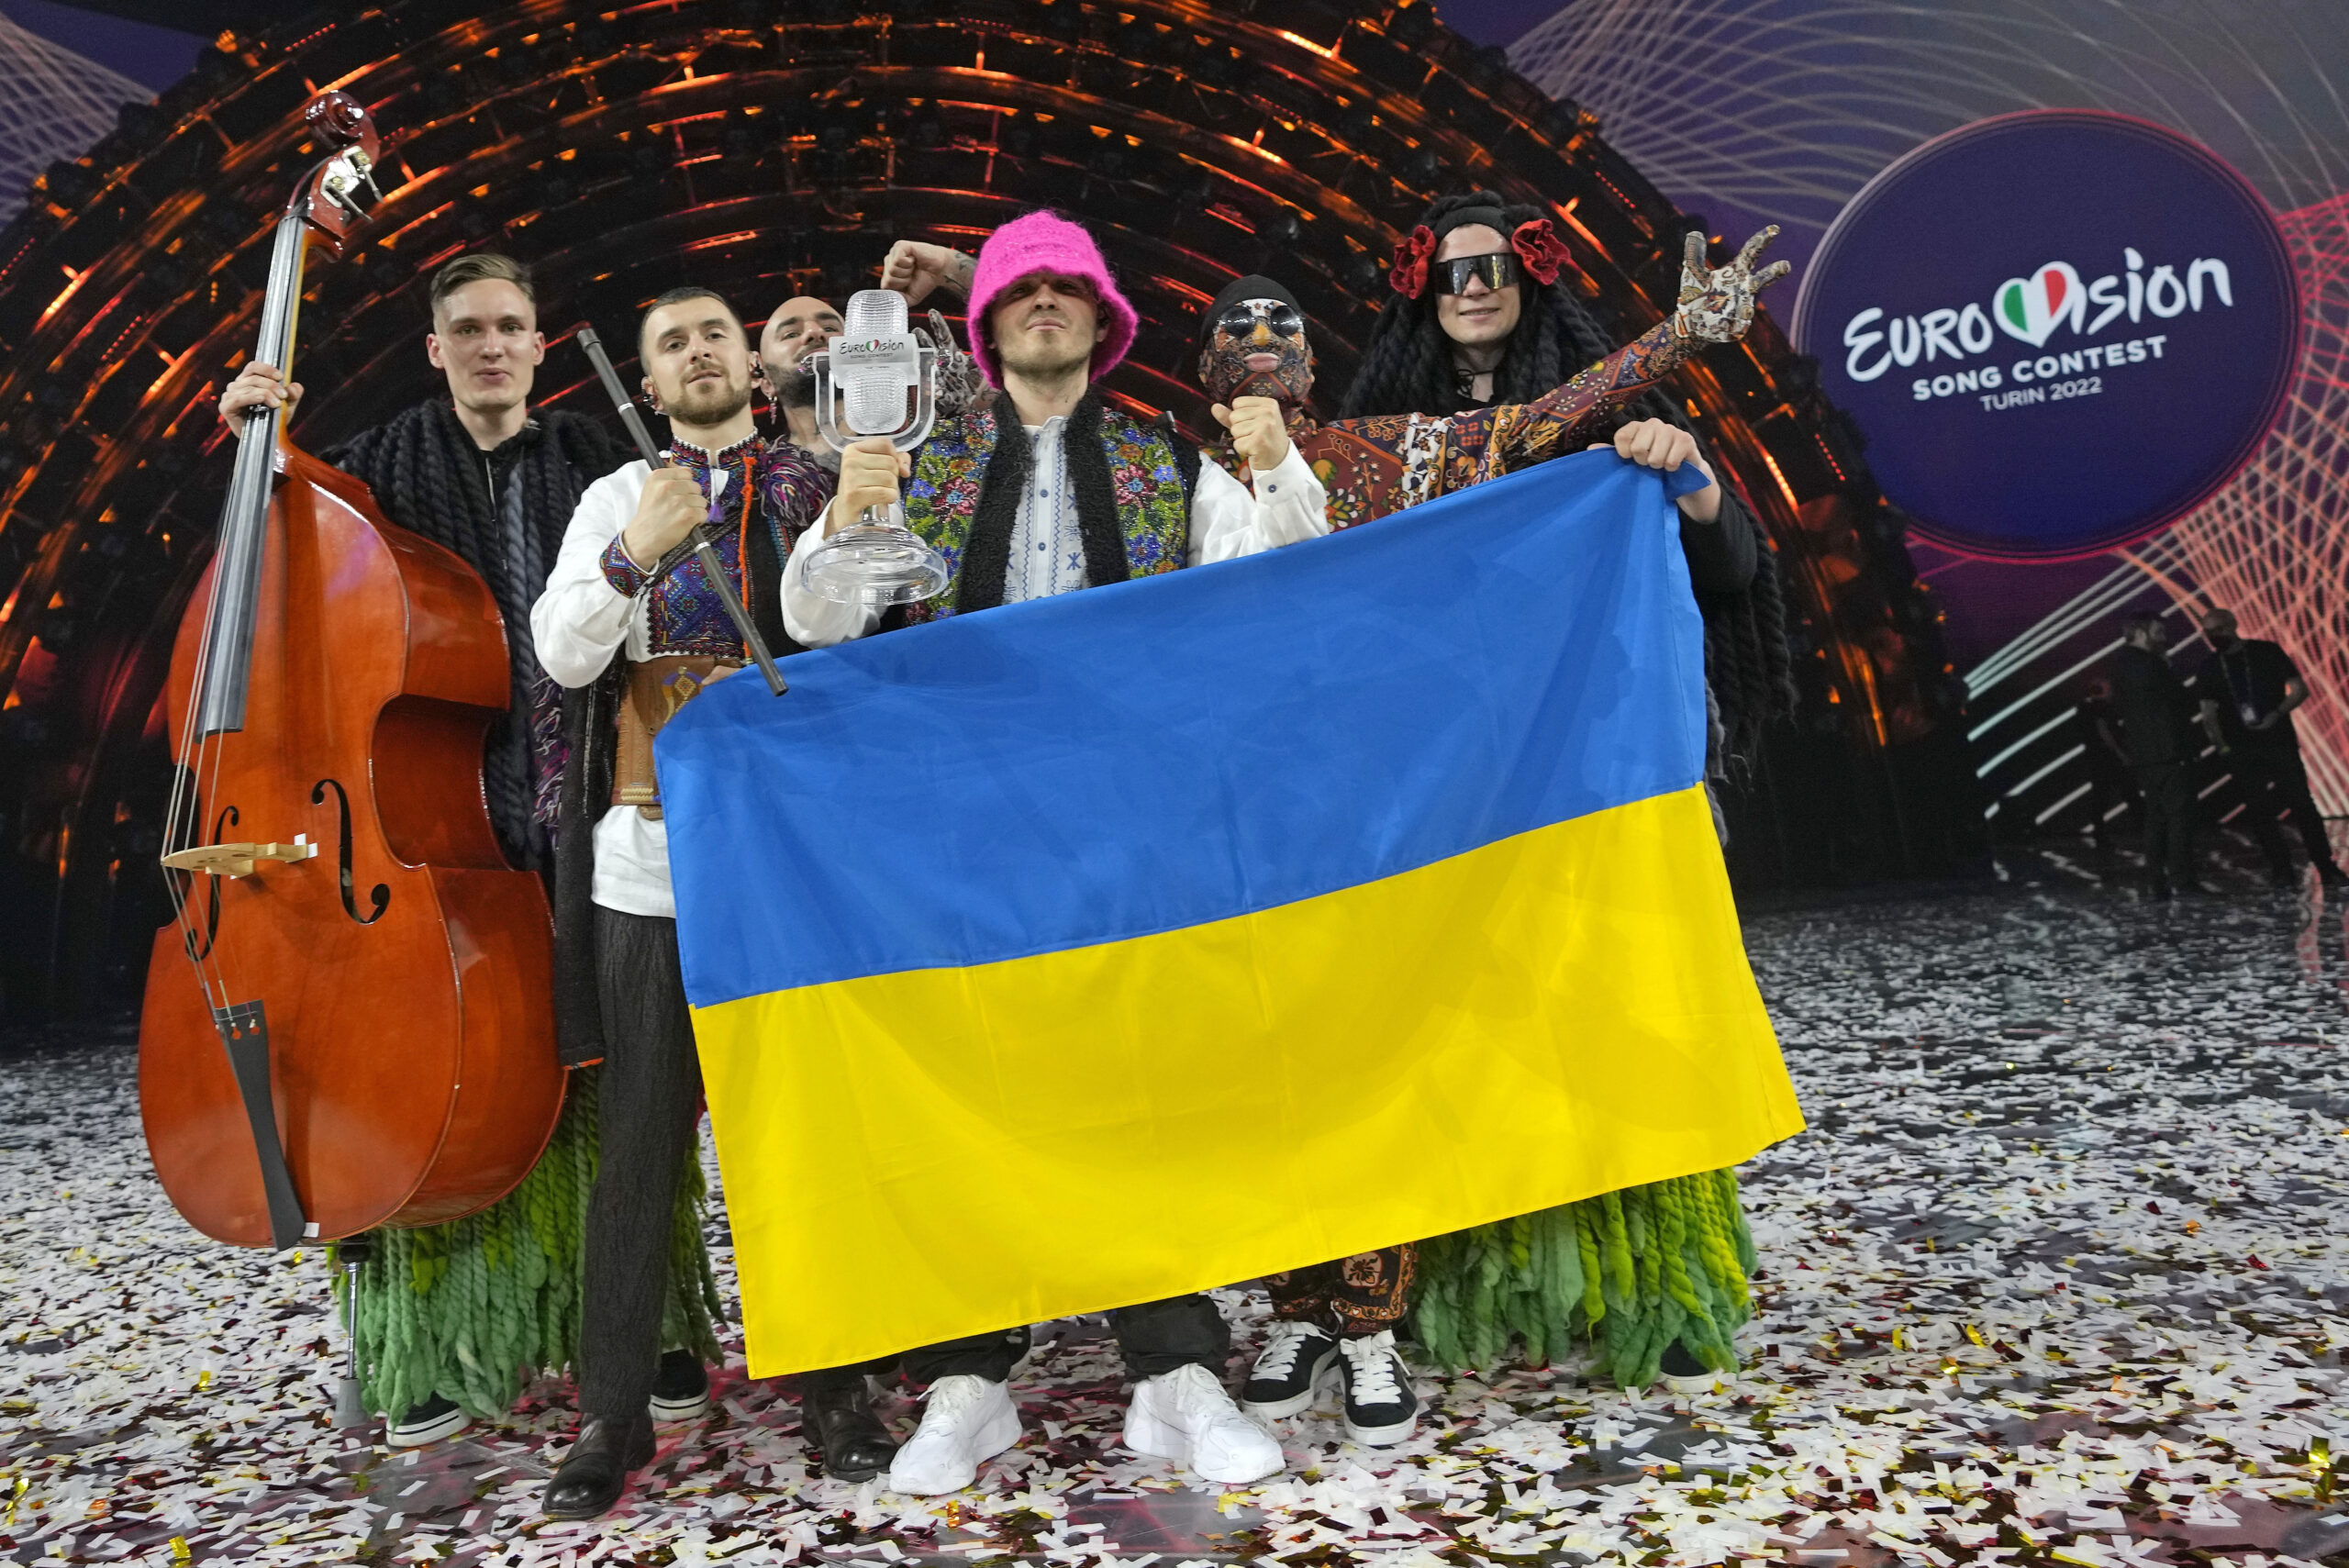 FILE - Kalush Orchestra from Ukraine celebrate after winning the Grand Final of the Eurovision Song Contest at Palaolimpico arena, in Turin, Italy, Saturday, May 14, 2022. Next year’s Eurovision Song Contest will be staged in Britain, organizers announced Monday, July 25, 2022 saying it is too risky to hold it in the designated host country, Ukraine. The U.K. said the 2023 pop extravaganza would be a celebration of Ukrainian culture and creativity. (AP Photo/Luca Bruno, File)